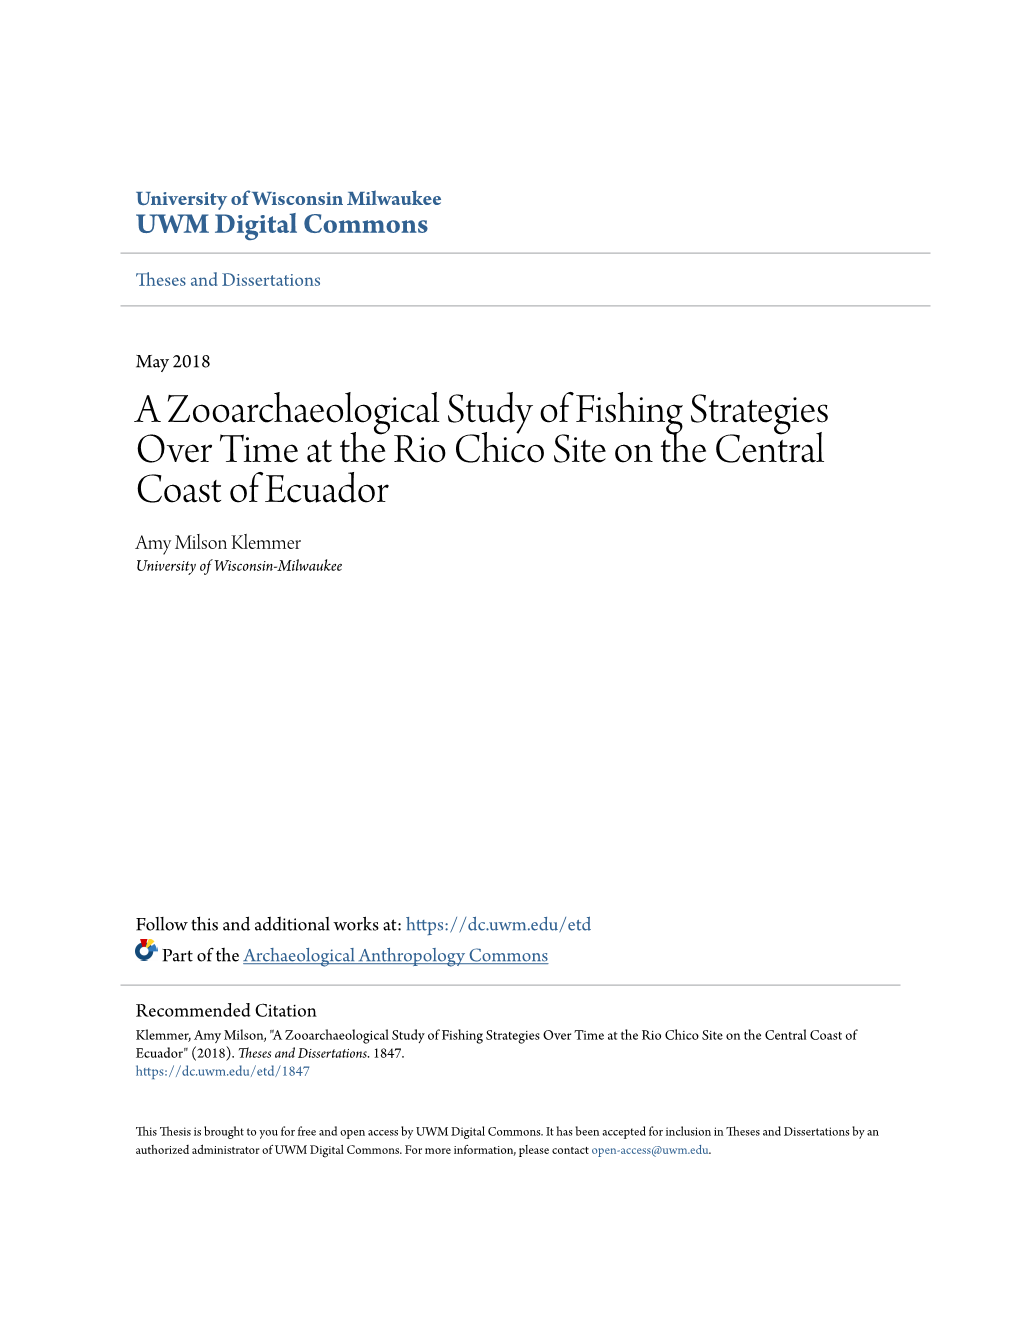 A Zooarchaeological Study of Fishing Strategies Over Time at the Rio Chico Site on the Central Coast of Ecuador Amy Milson Klemmer University of Wisconsin-Milwaukee